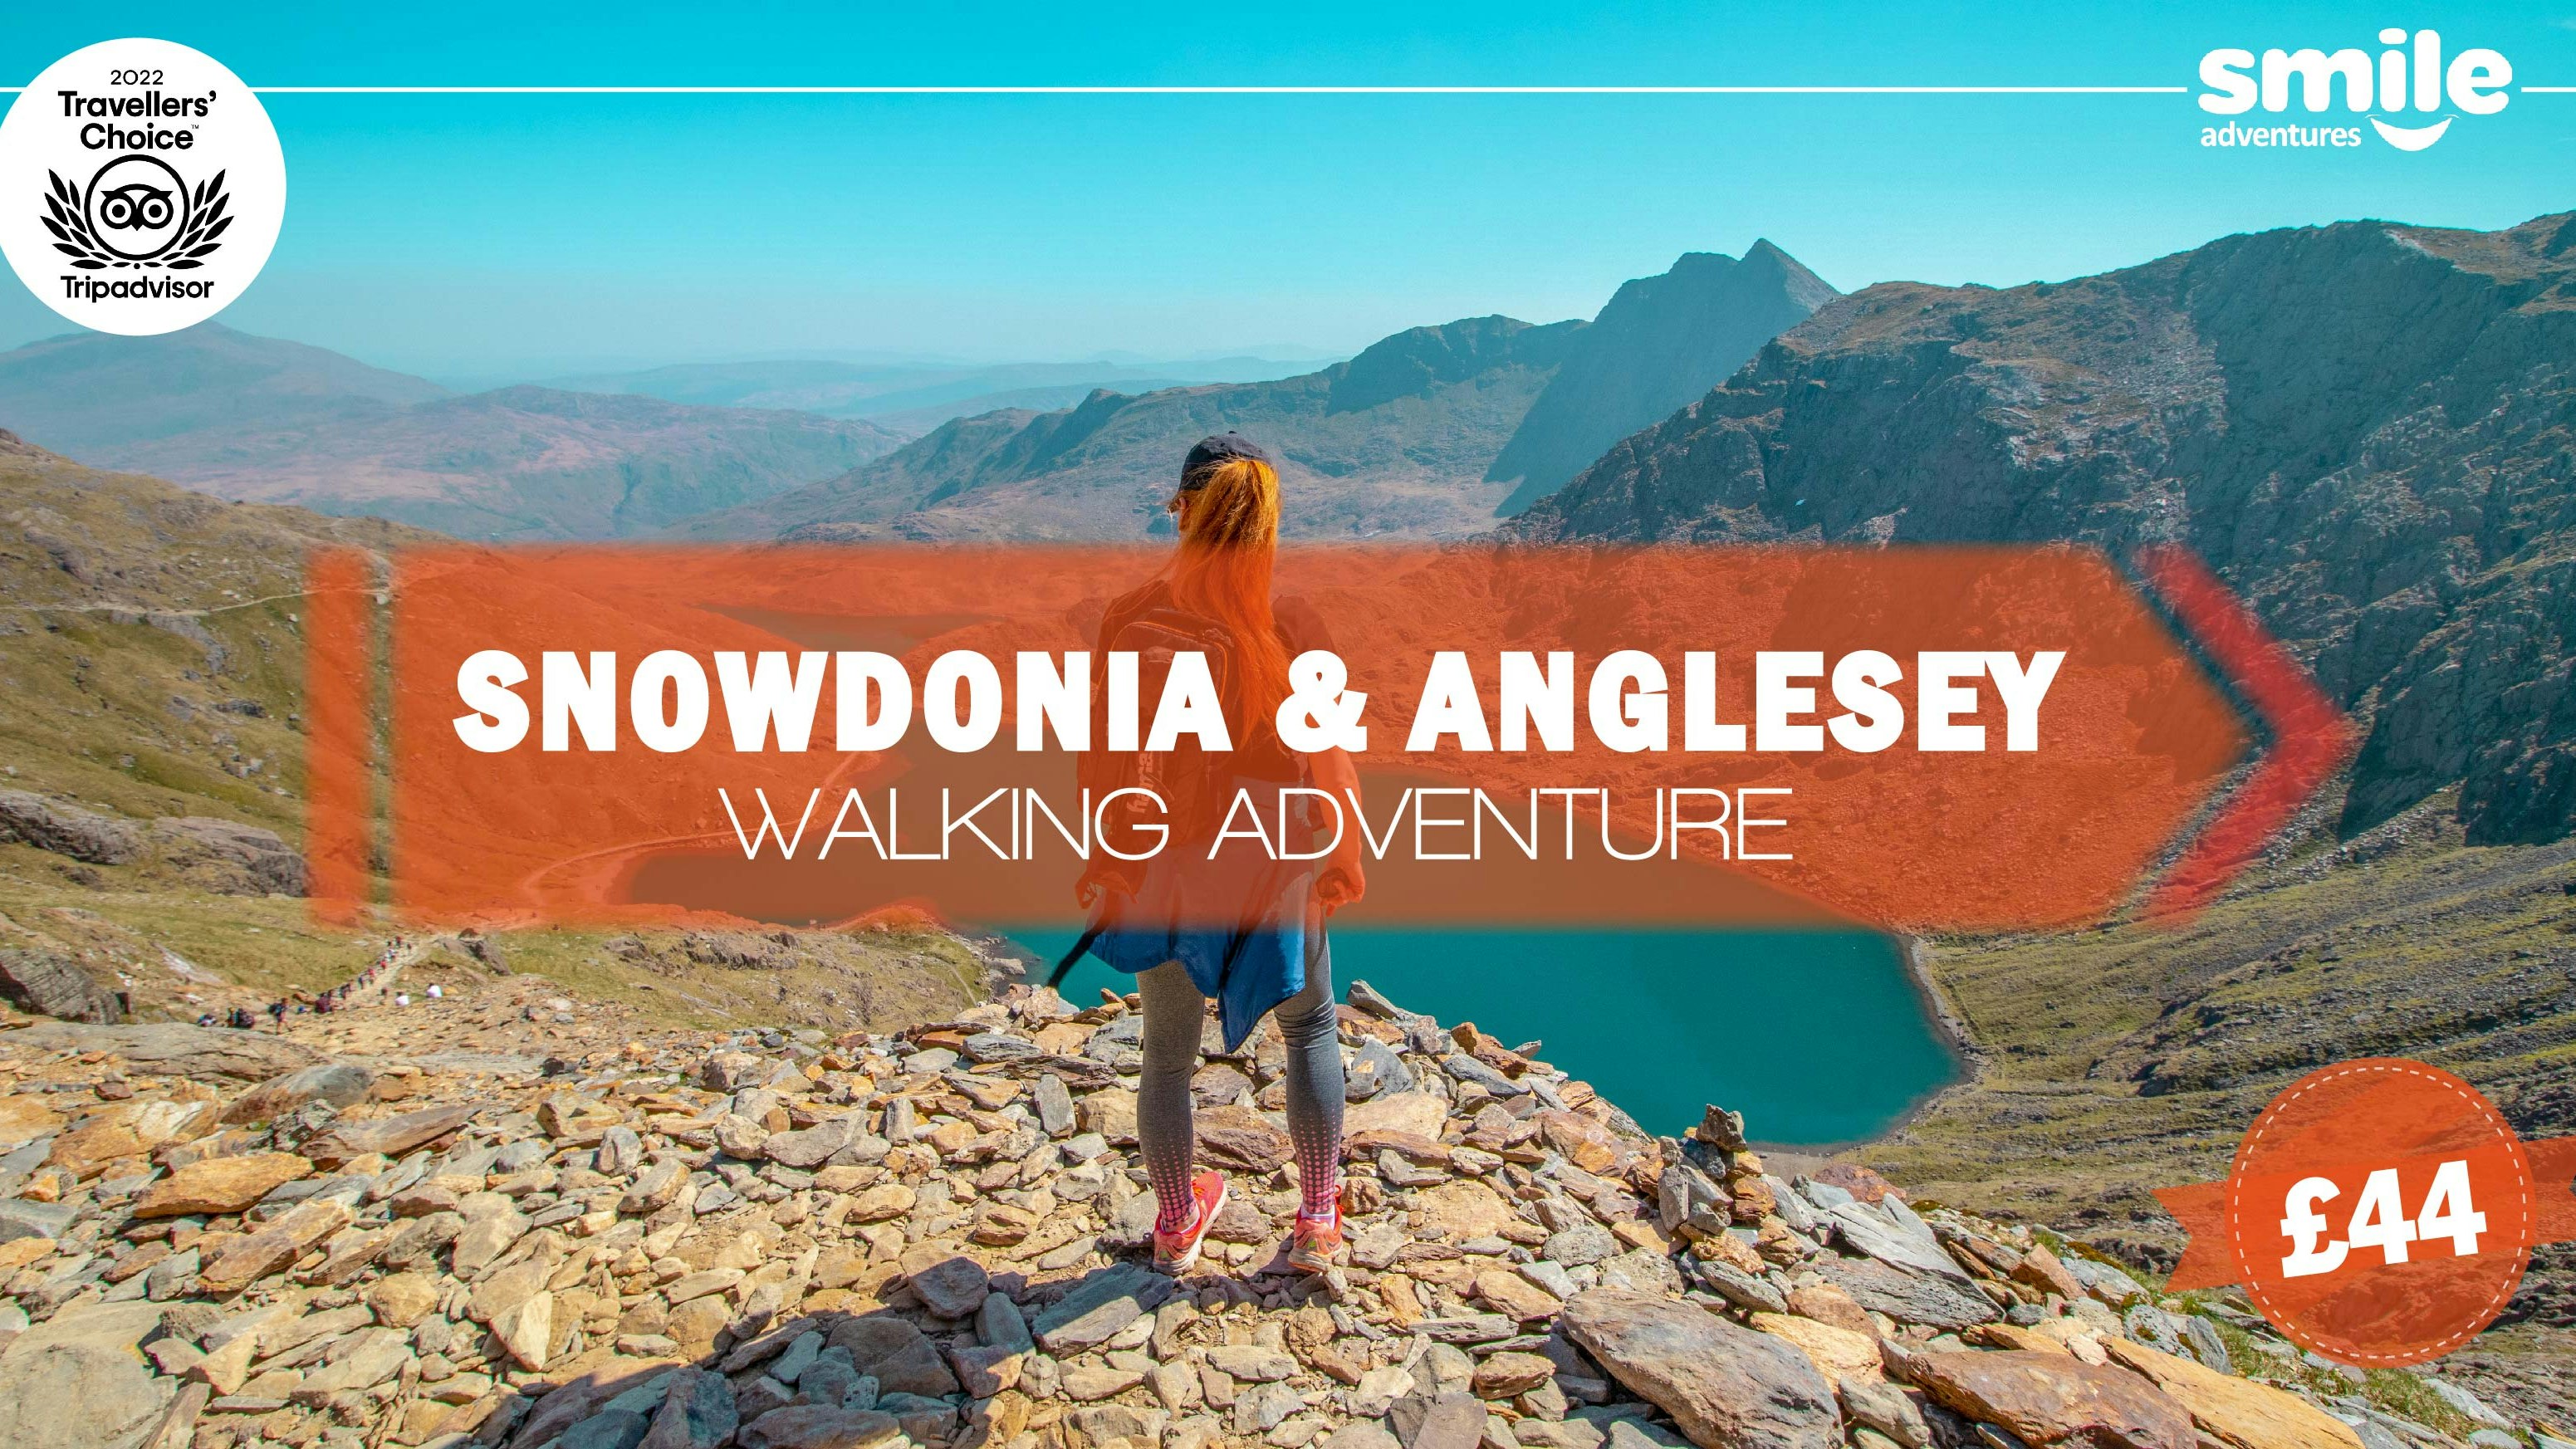 Snowdonia & Anglesey Walking Adventure – From Manchester